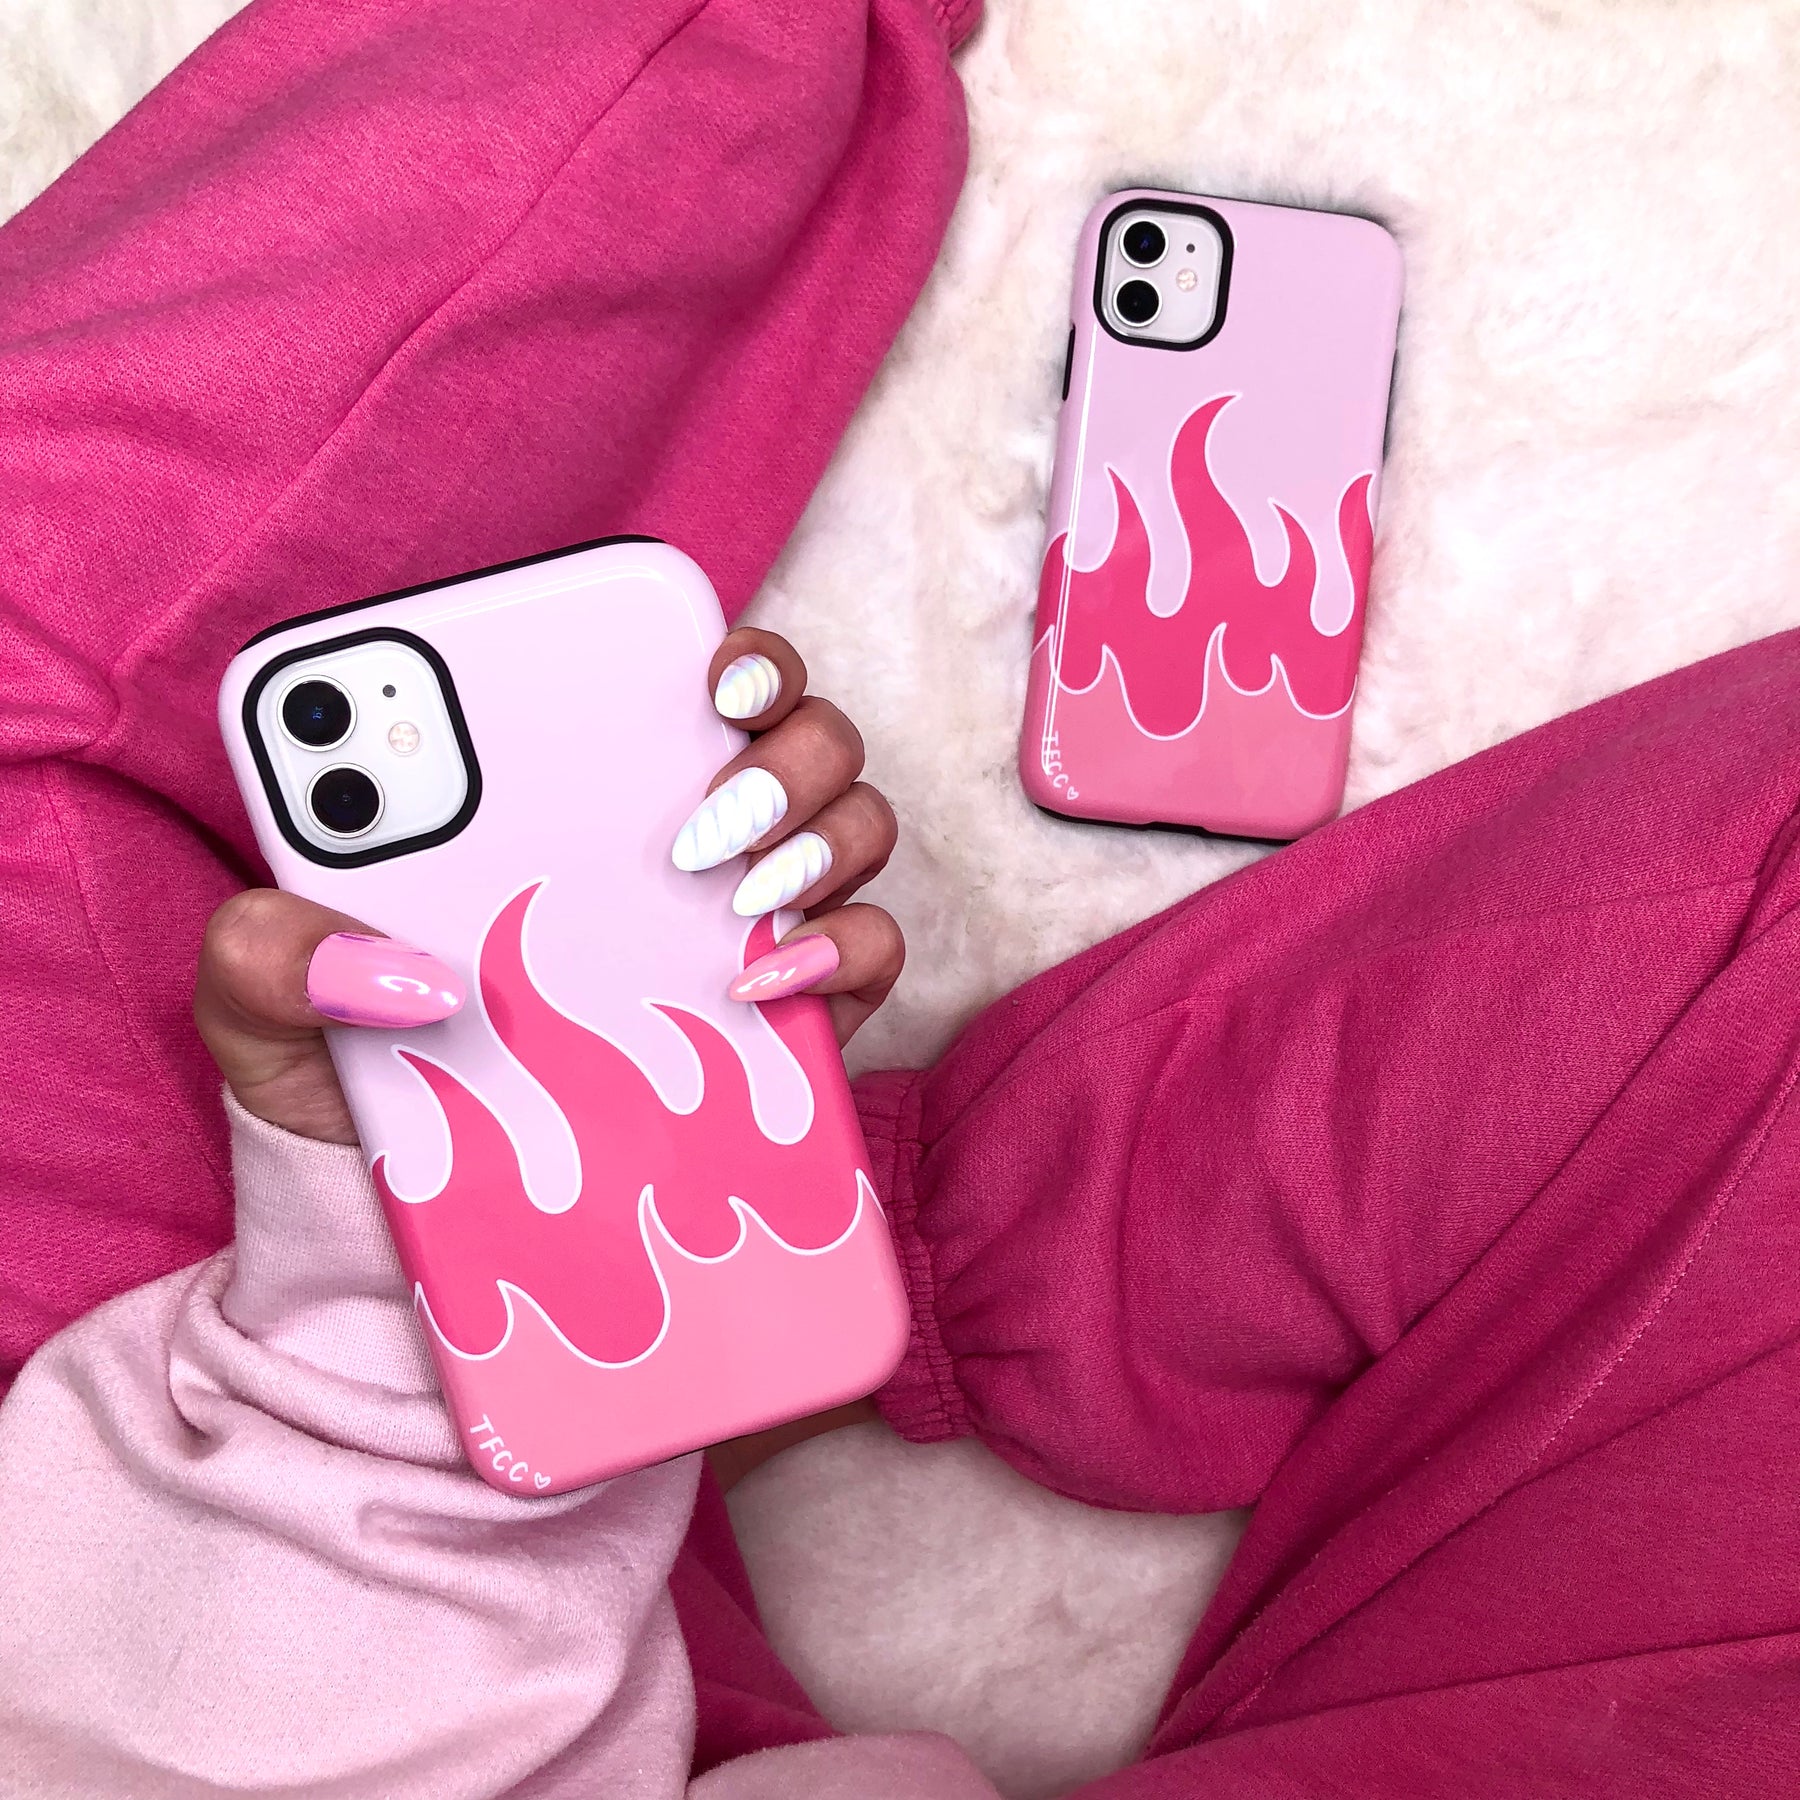 FLAMES CASE - thefonecasecompany